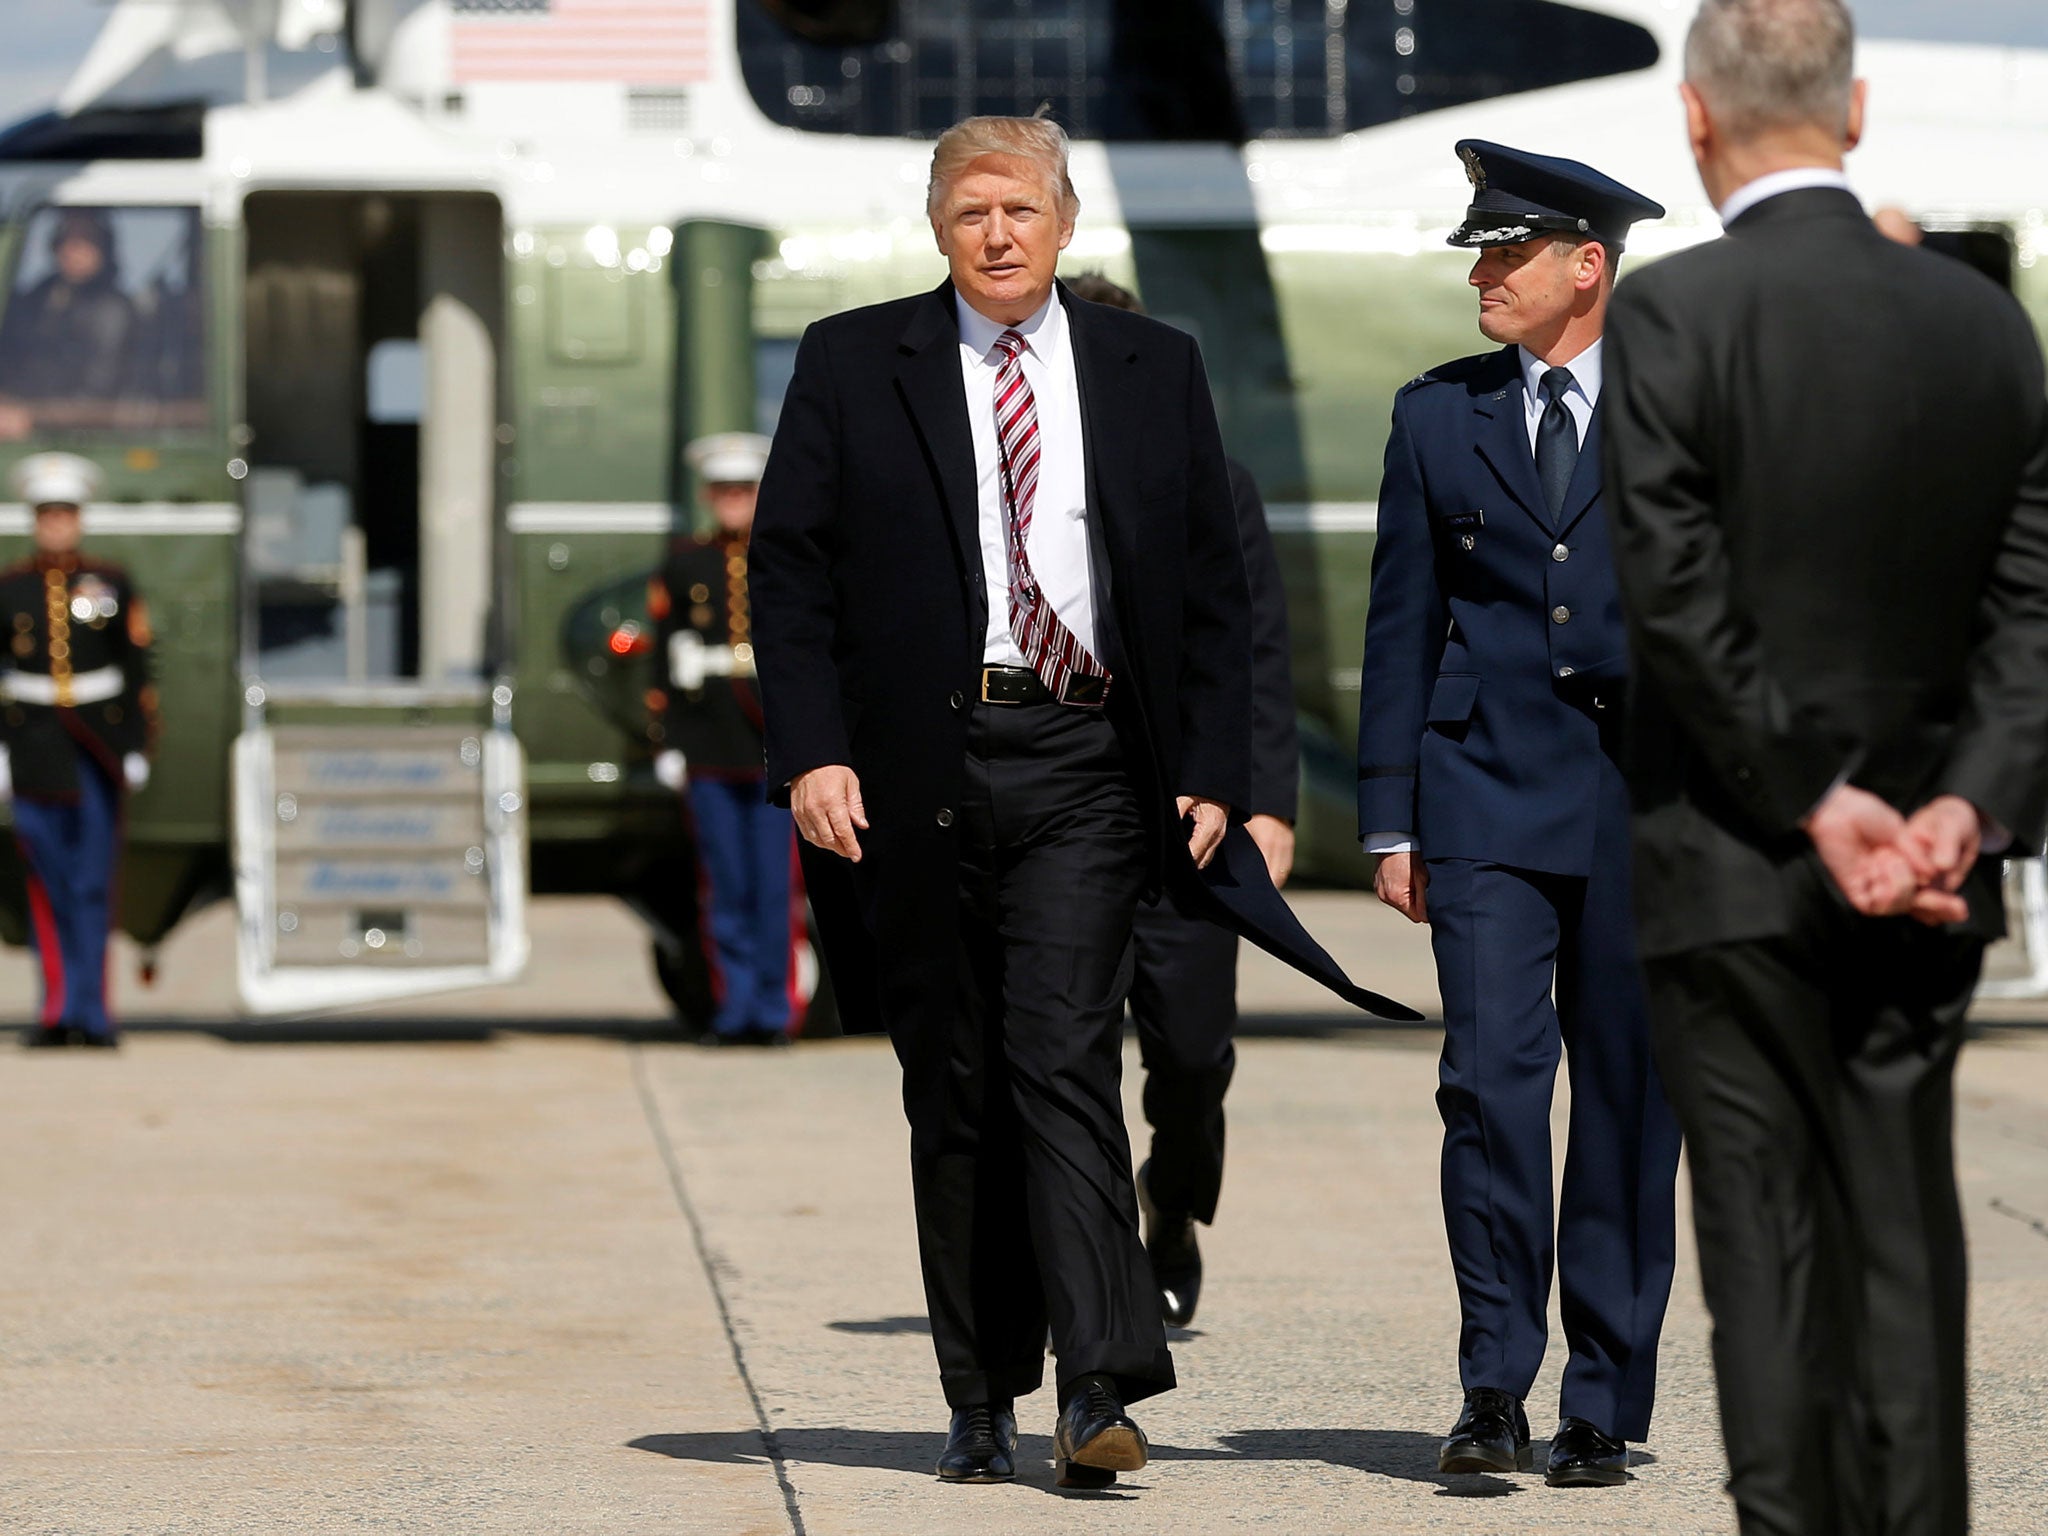 President Donald Trump arrives to board Air Force One at Joint Base Andrews in Maryland